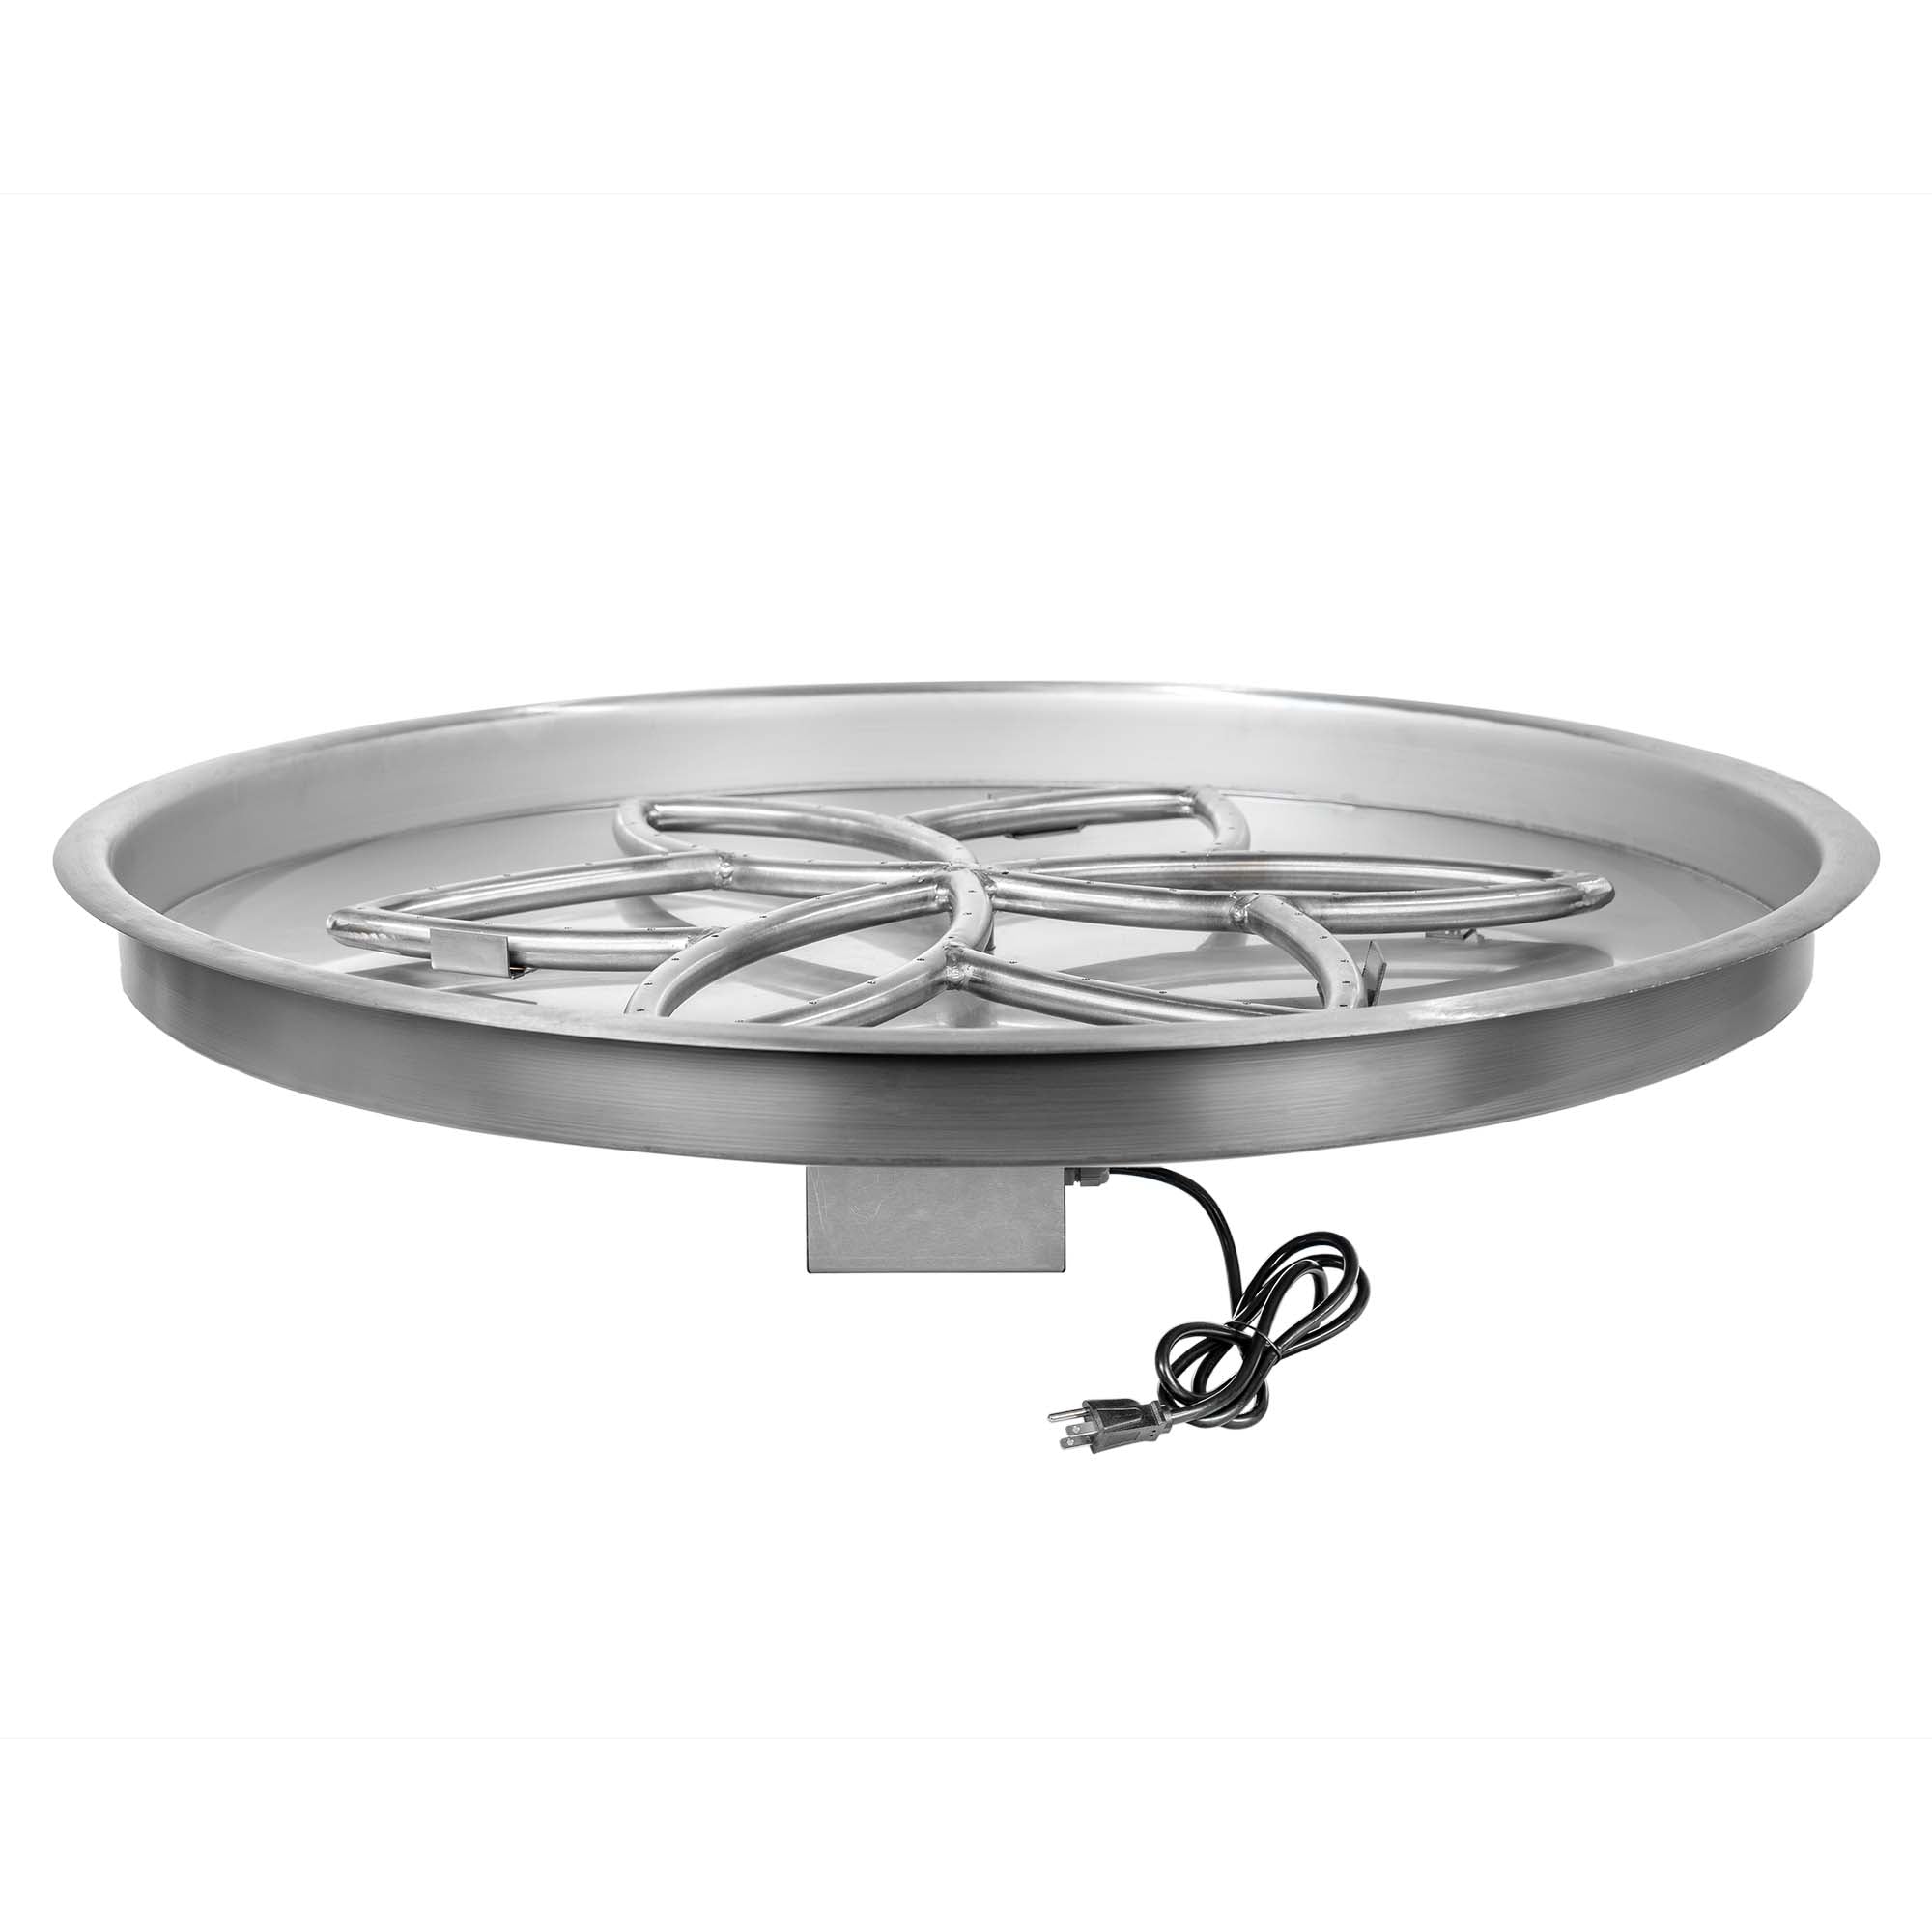 The Outdoor Plus Round Drop-in Pan with Stainless Steel Lotus Burner